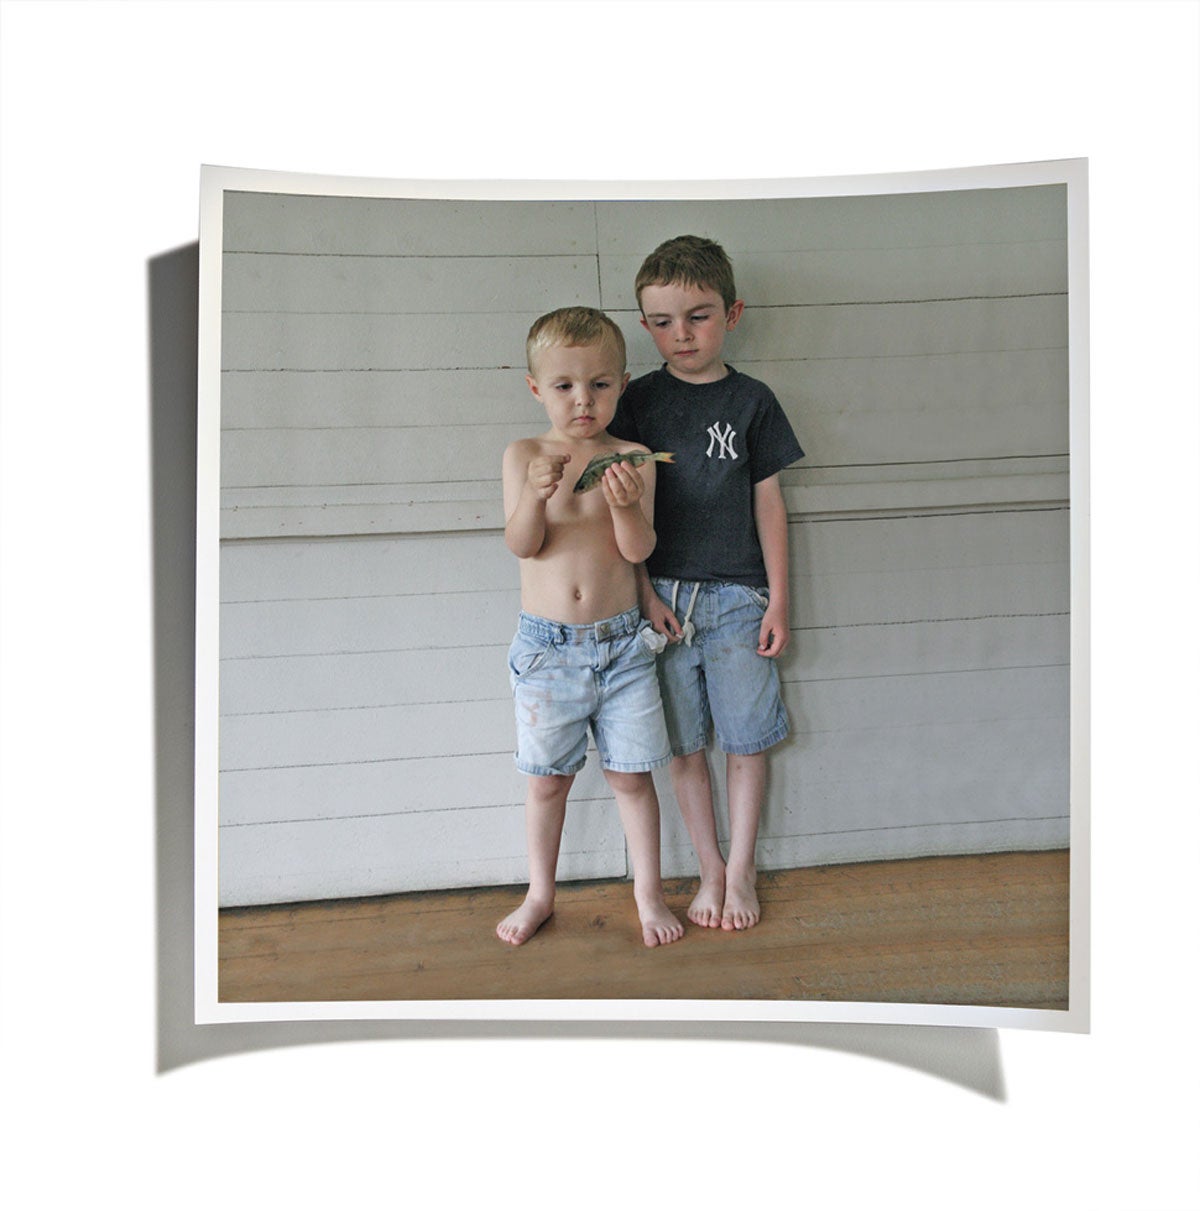 Two young boys holding a fish on a front porch.